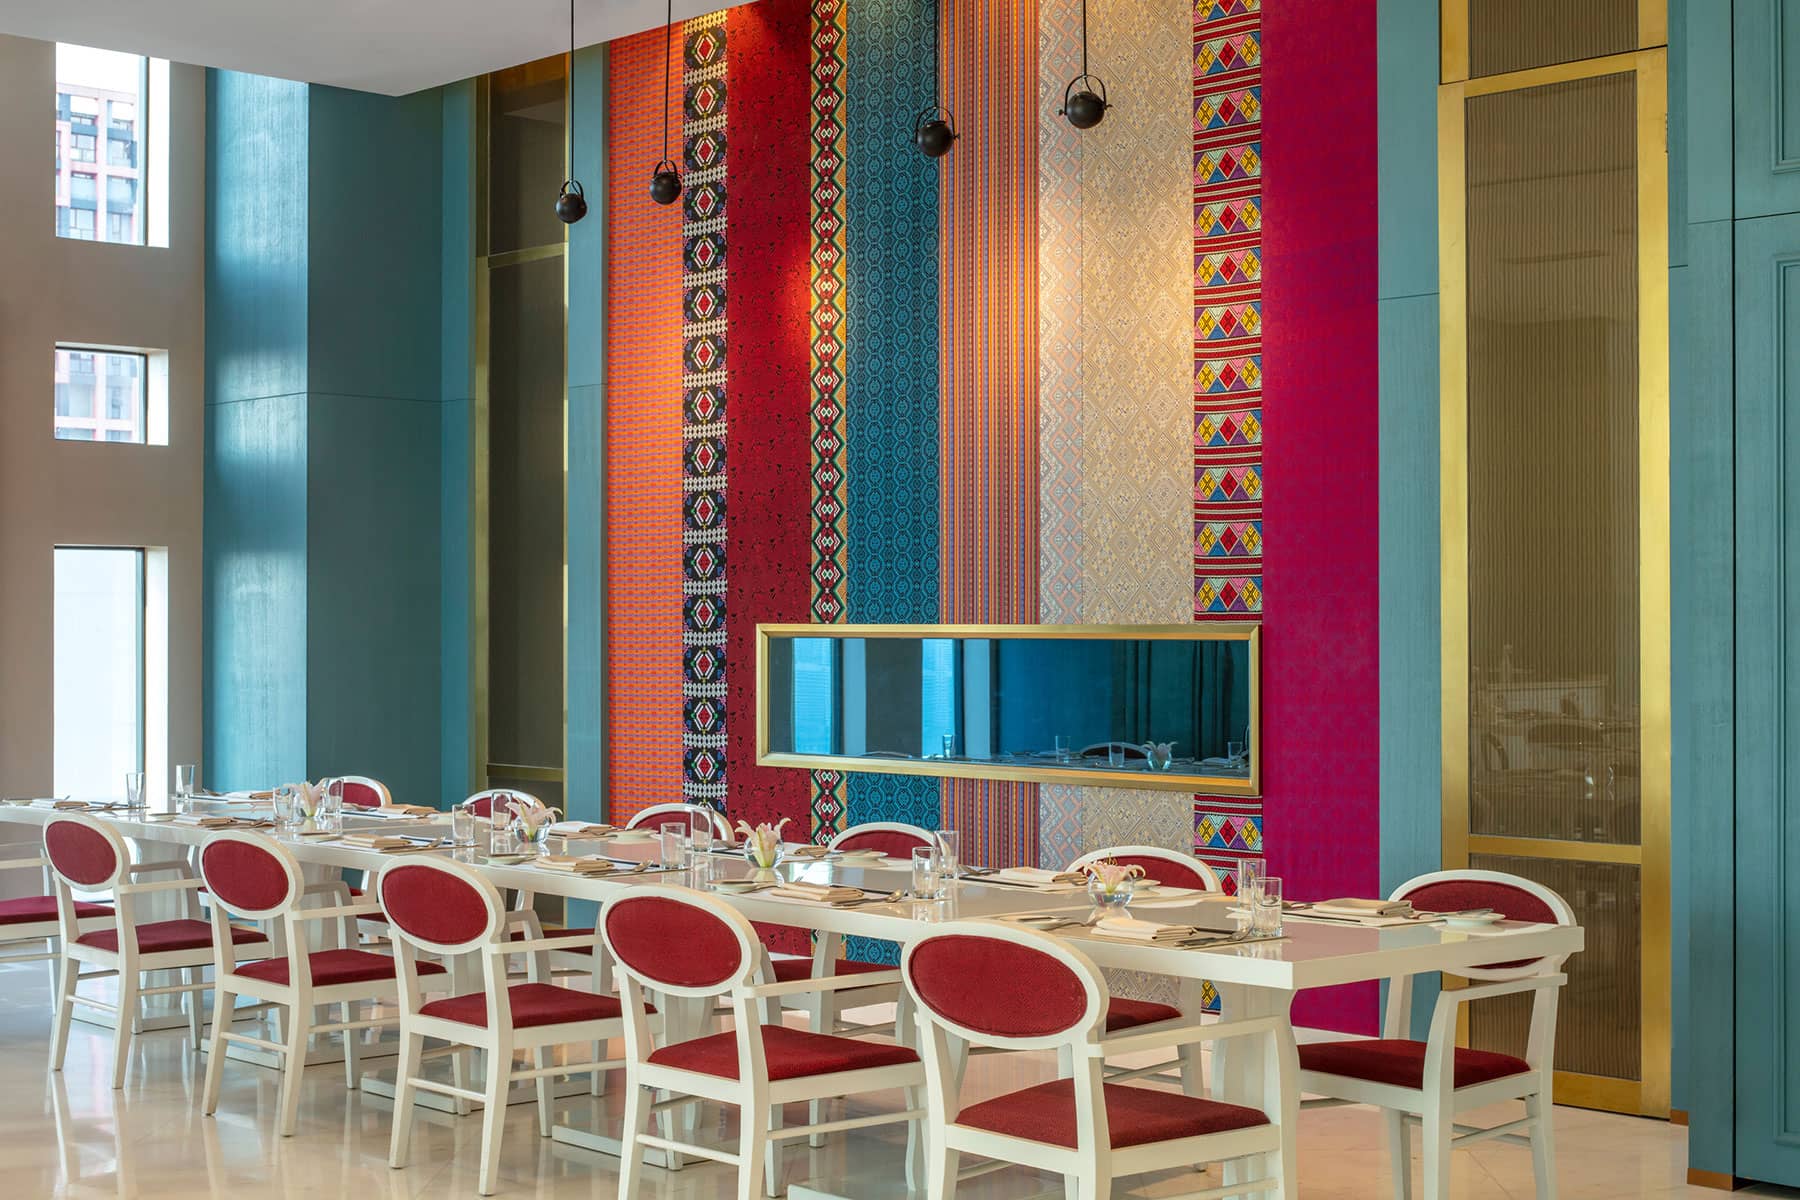 Hospitality Photography: Colourful Dining Environment